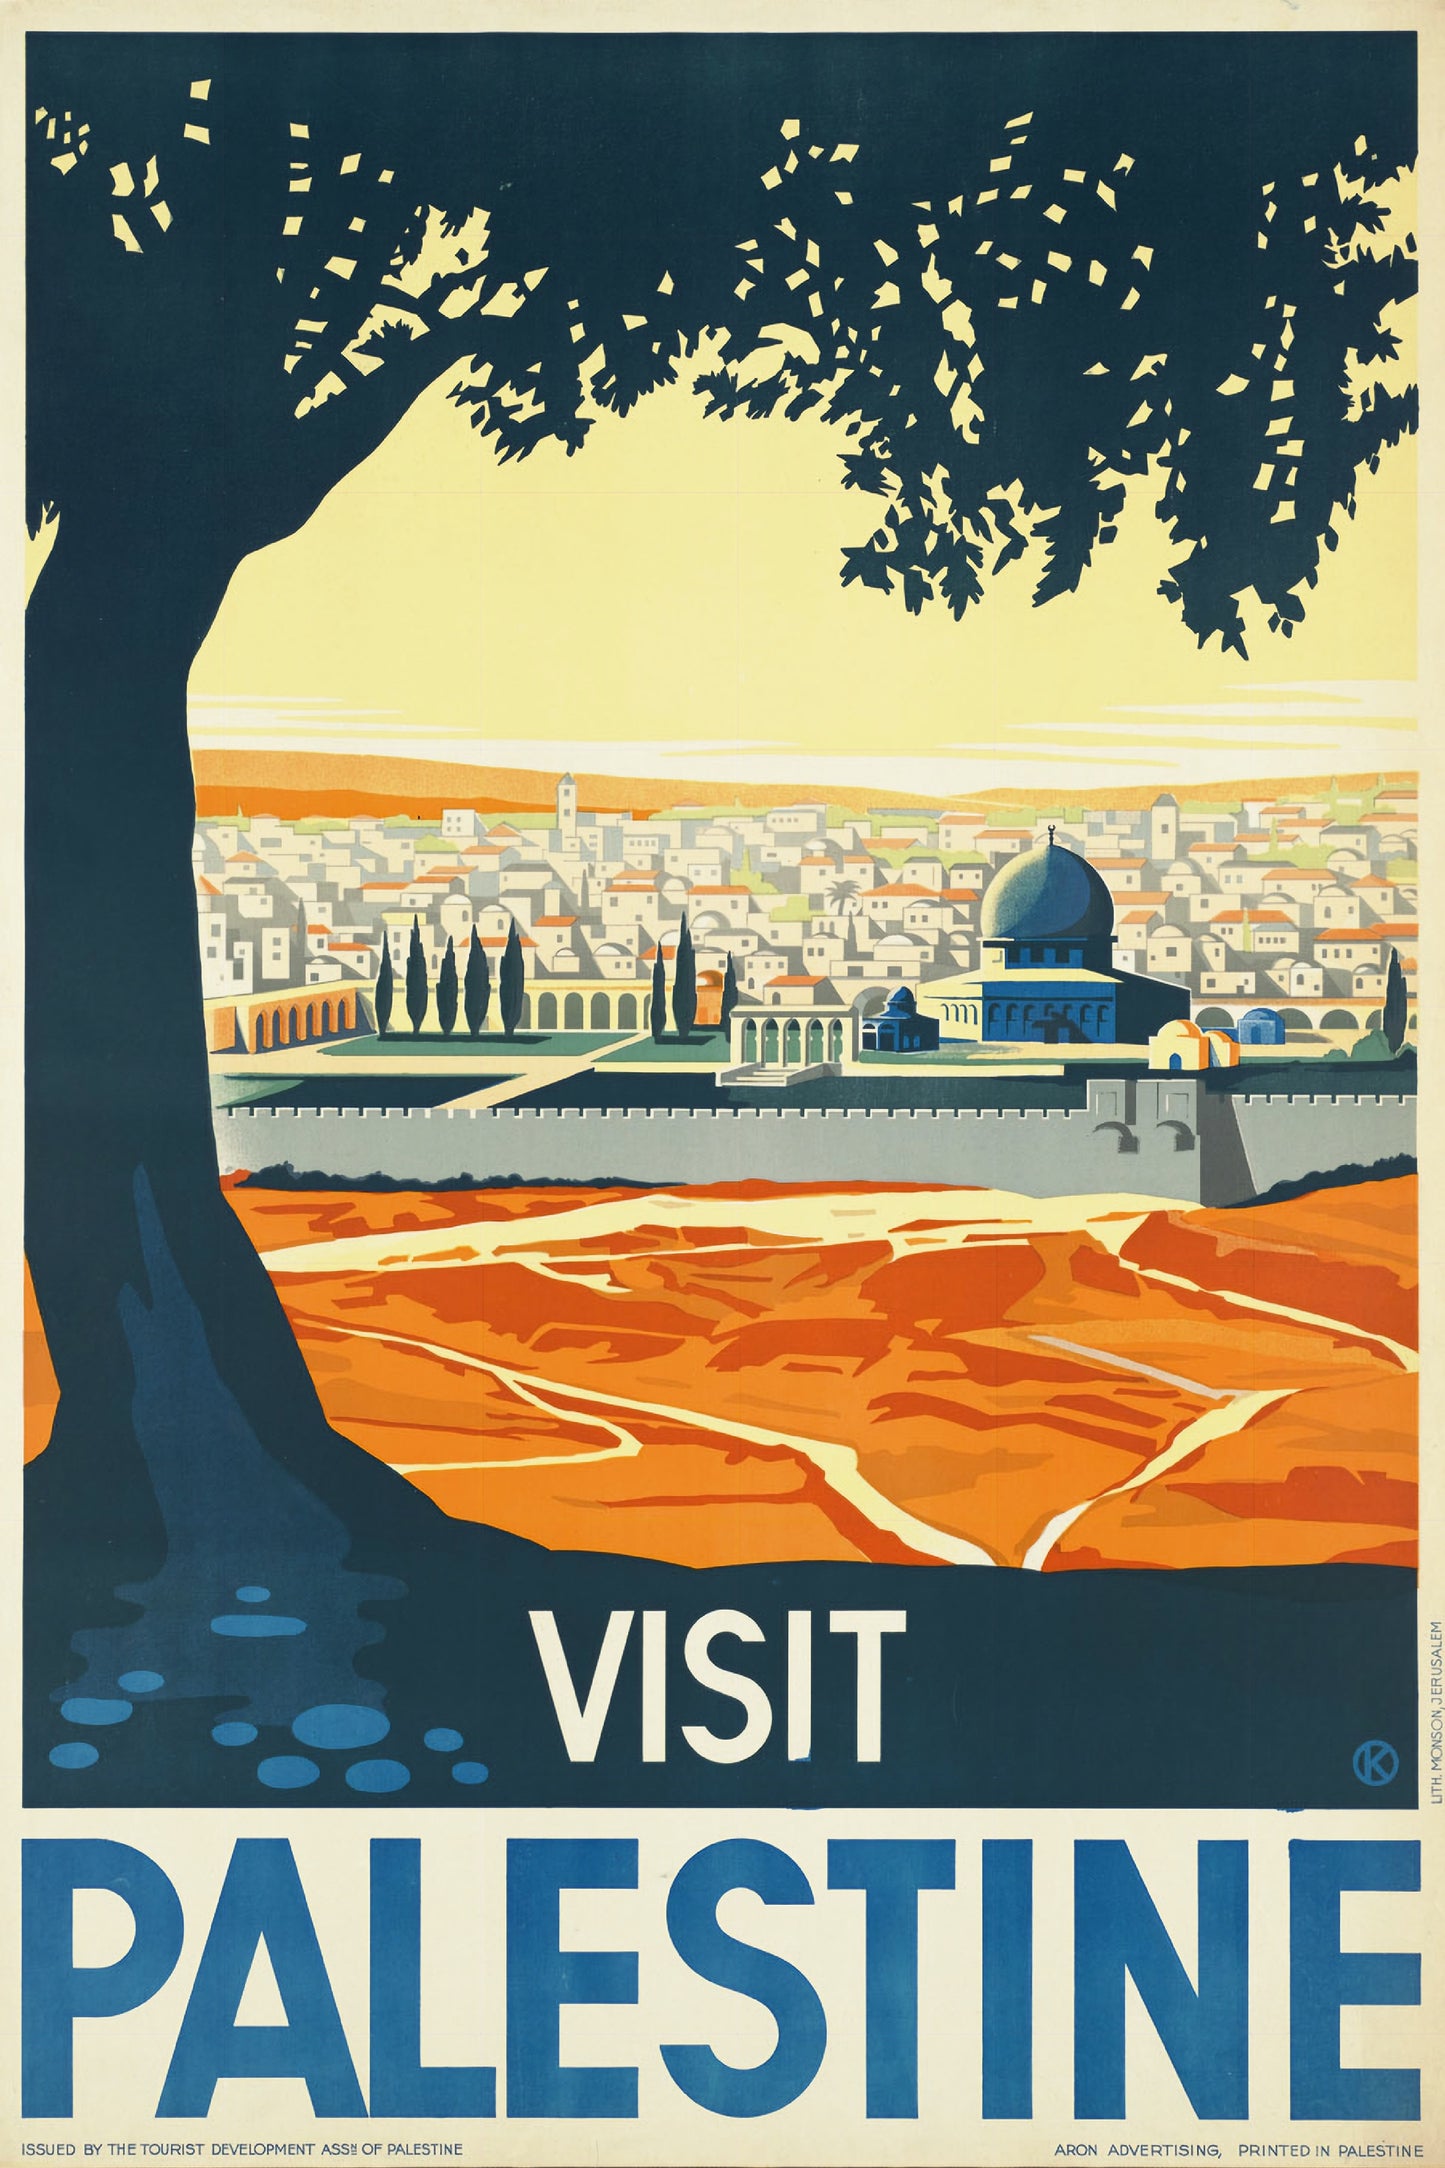 Travel Poster Hors d'oeuvres Napkins